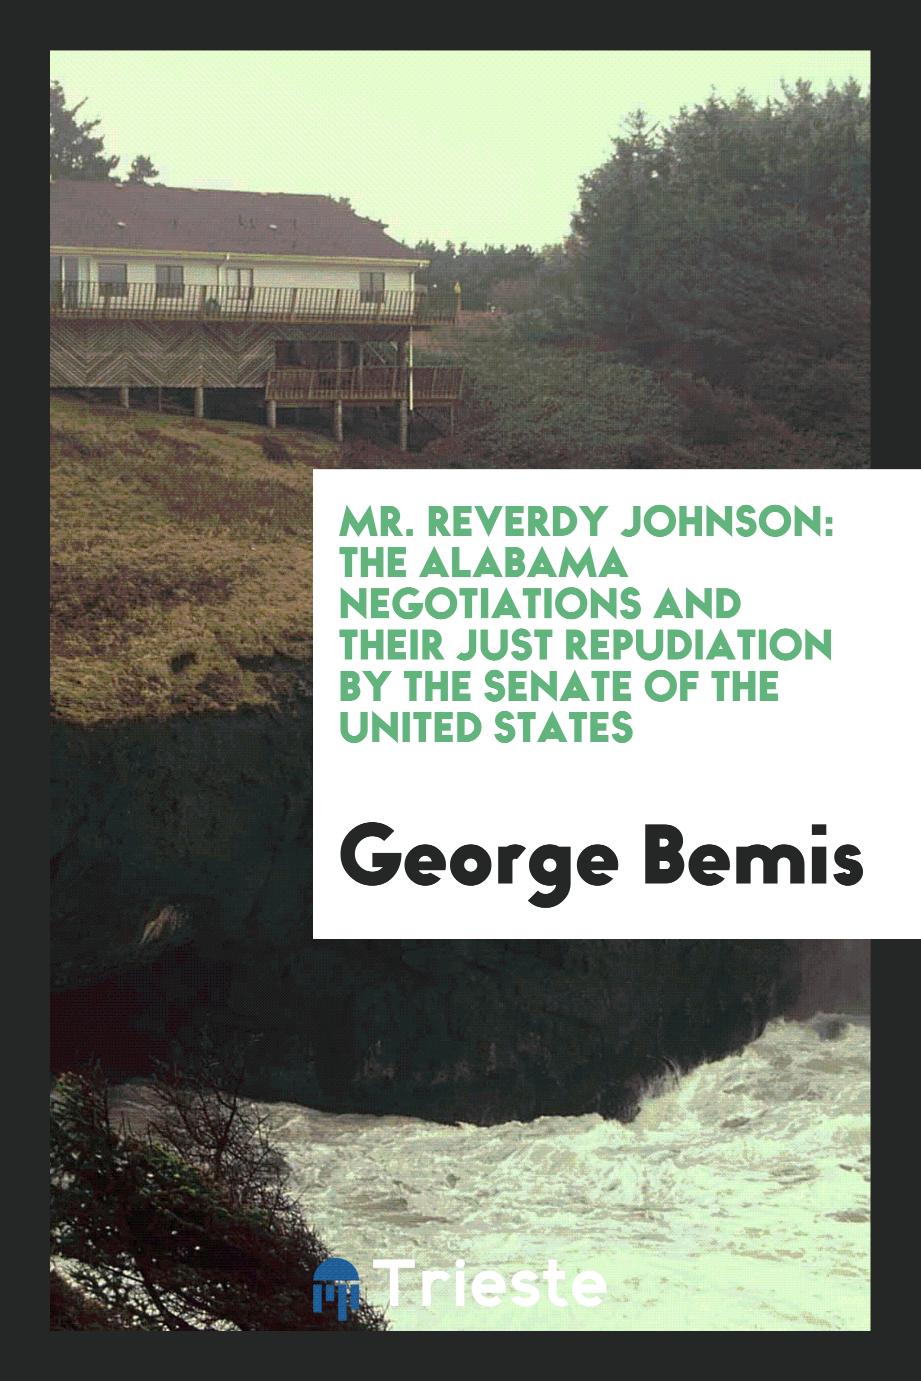 Mr. Reverdy Johnson: the Alabama negotiations and their just repudiation by the Senate of the United States